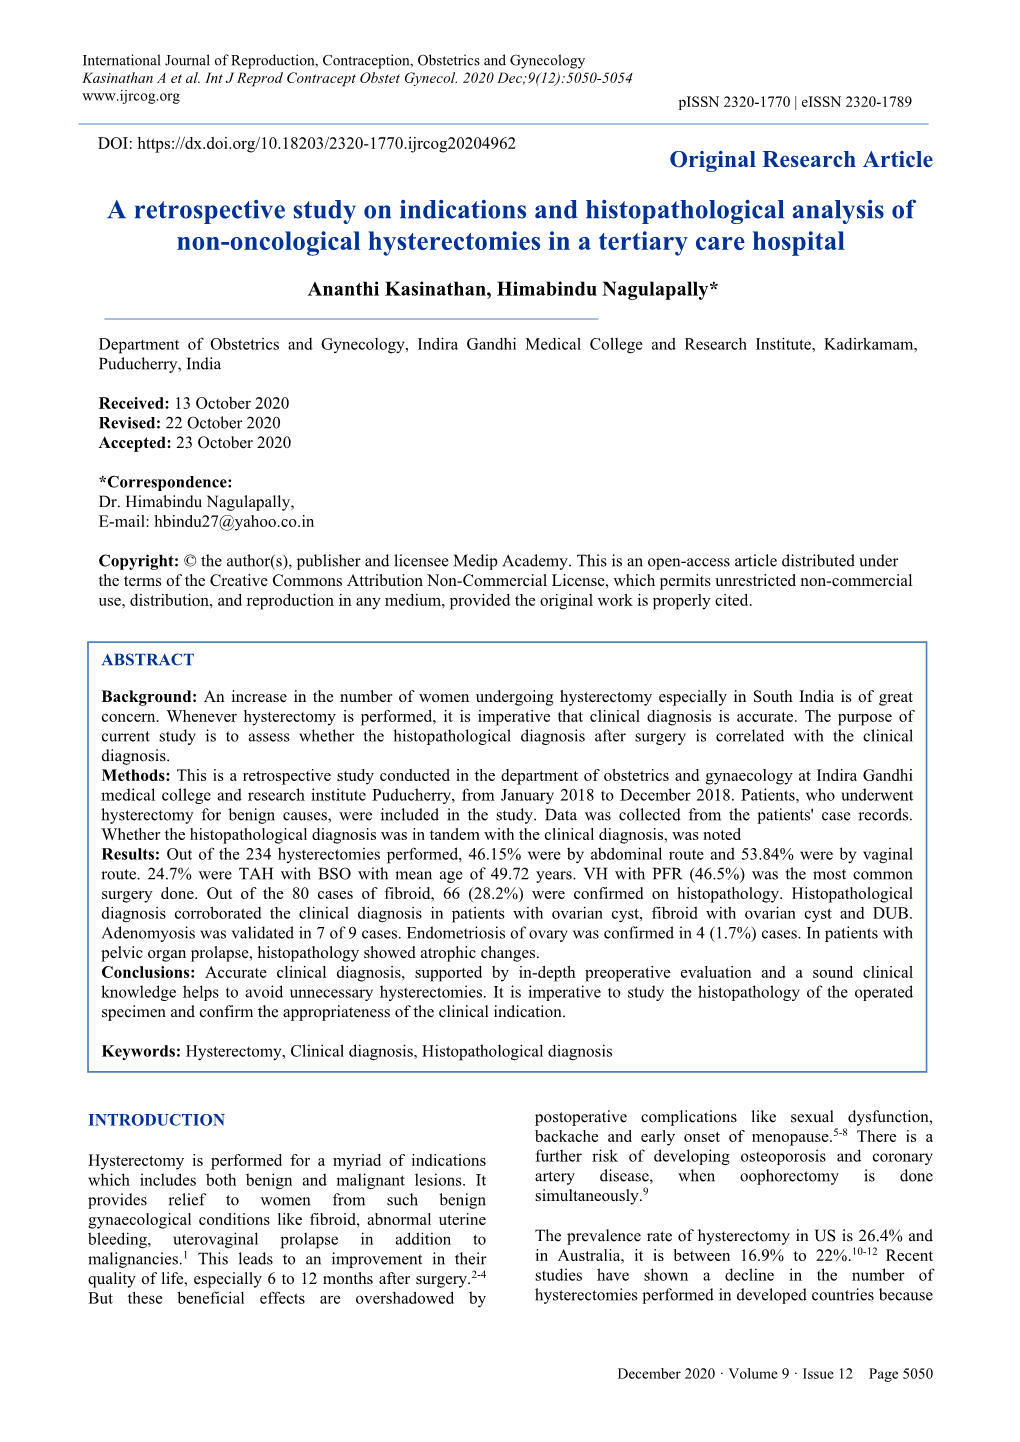 A Retrospective Study on Indications and Histopathological Analysis of Non-Oncological Hysterectomies in a Tertiary Care Hospital